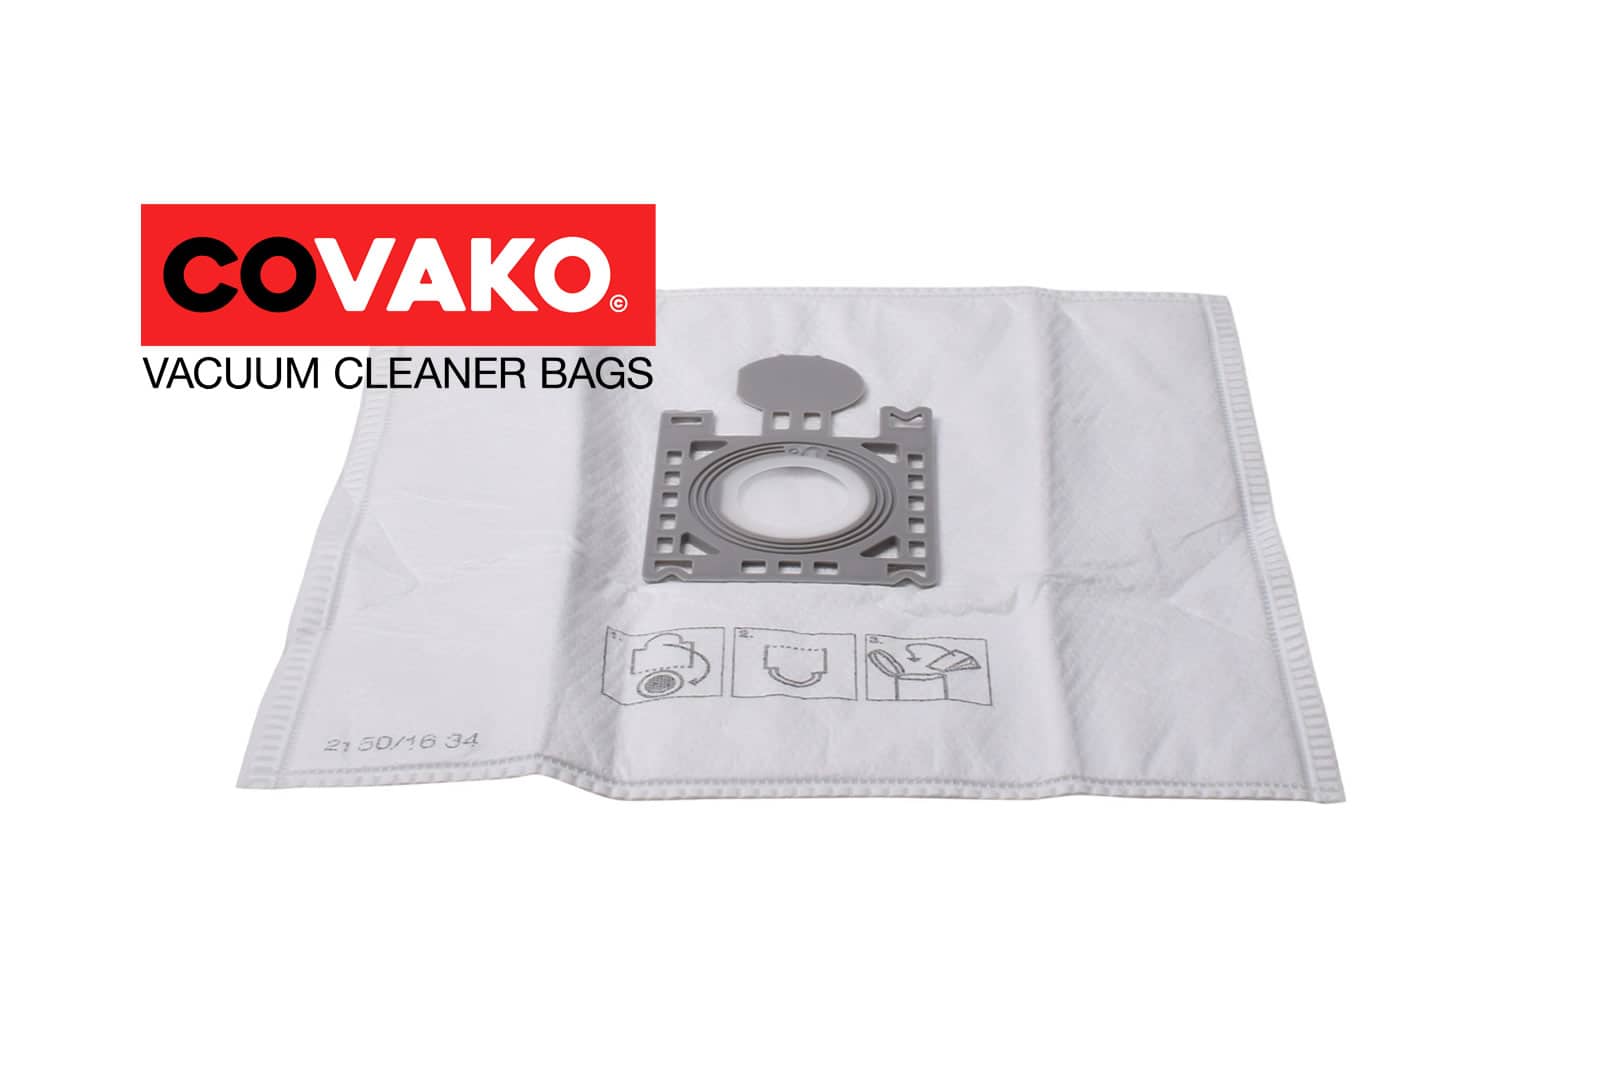 EIO Compact Eco / Synthesis - EIO vacuum cleaner bags